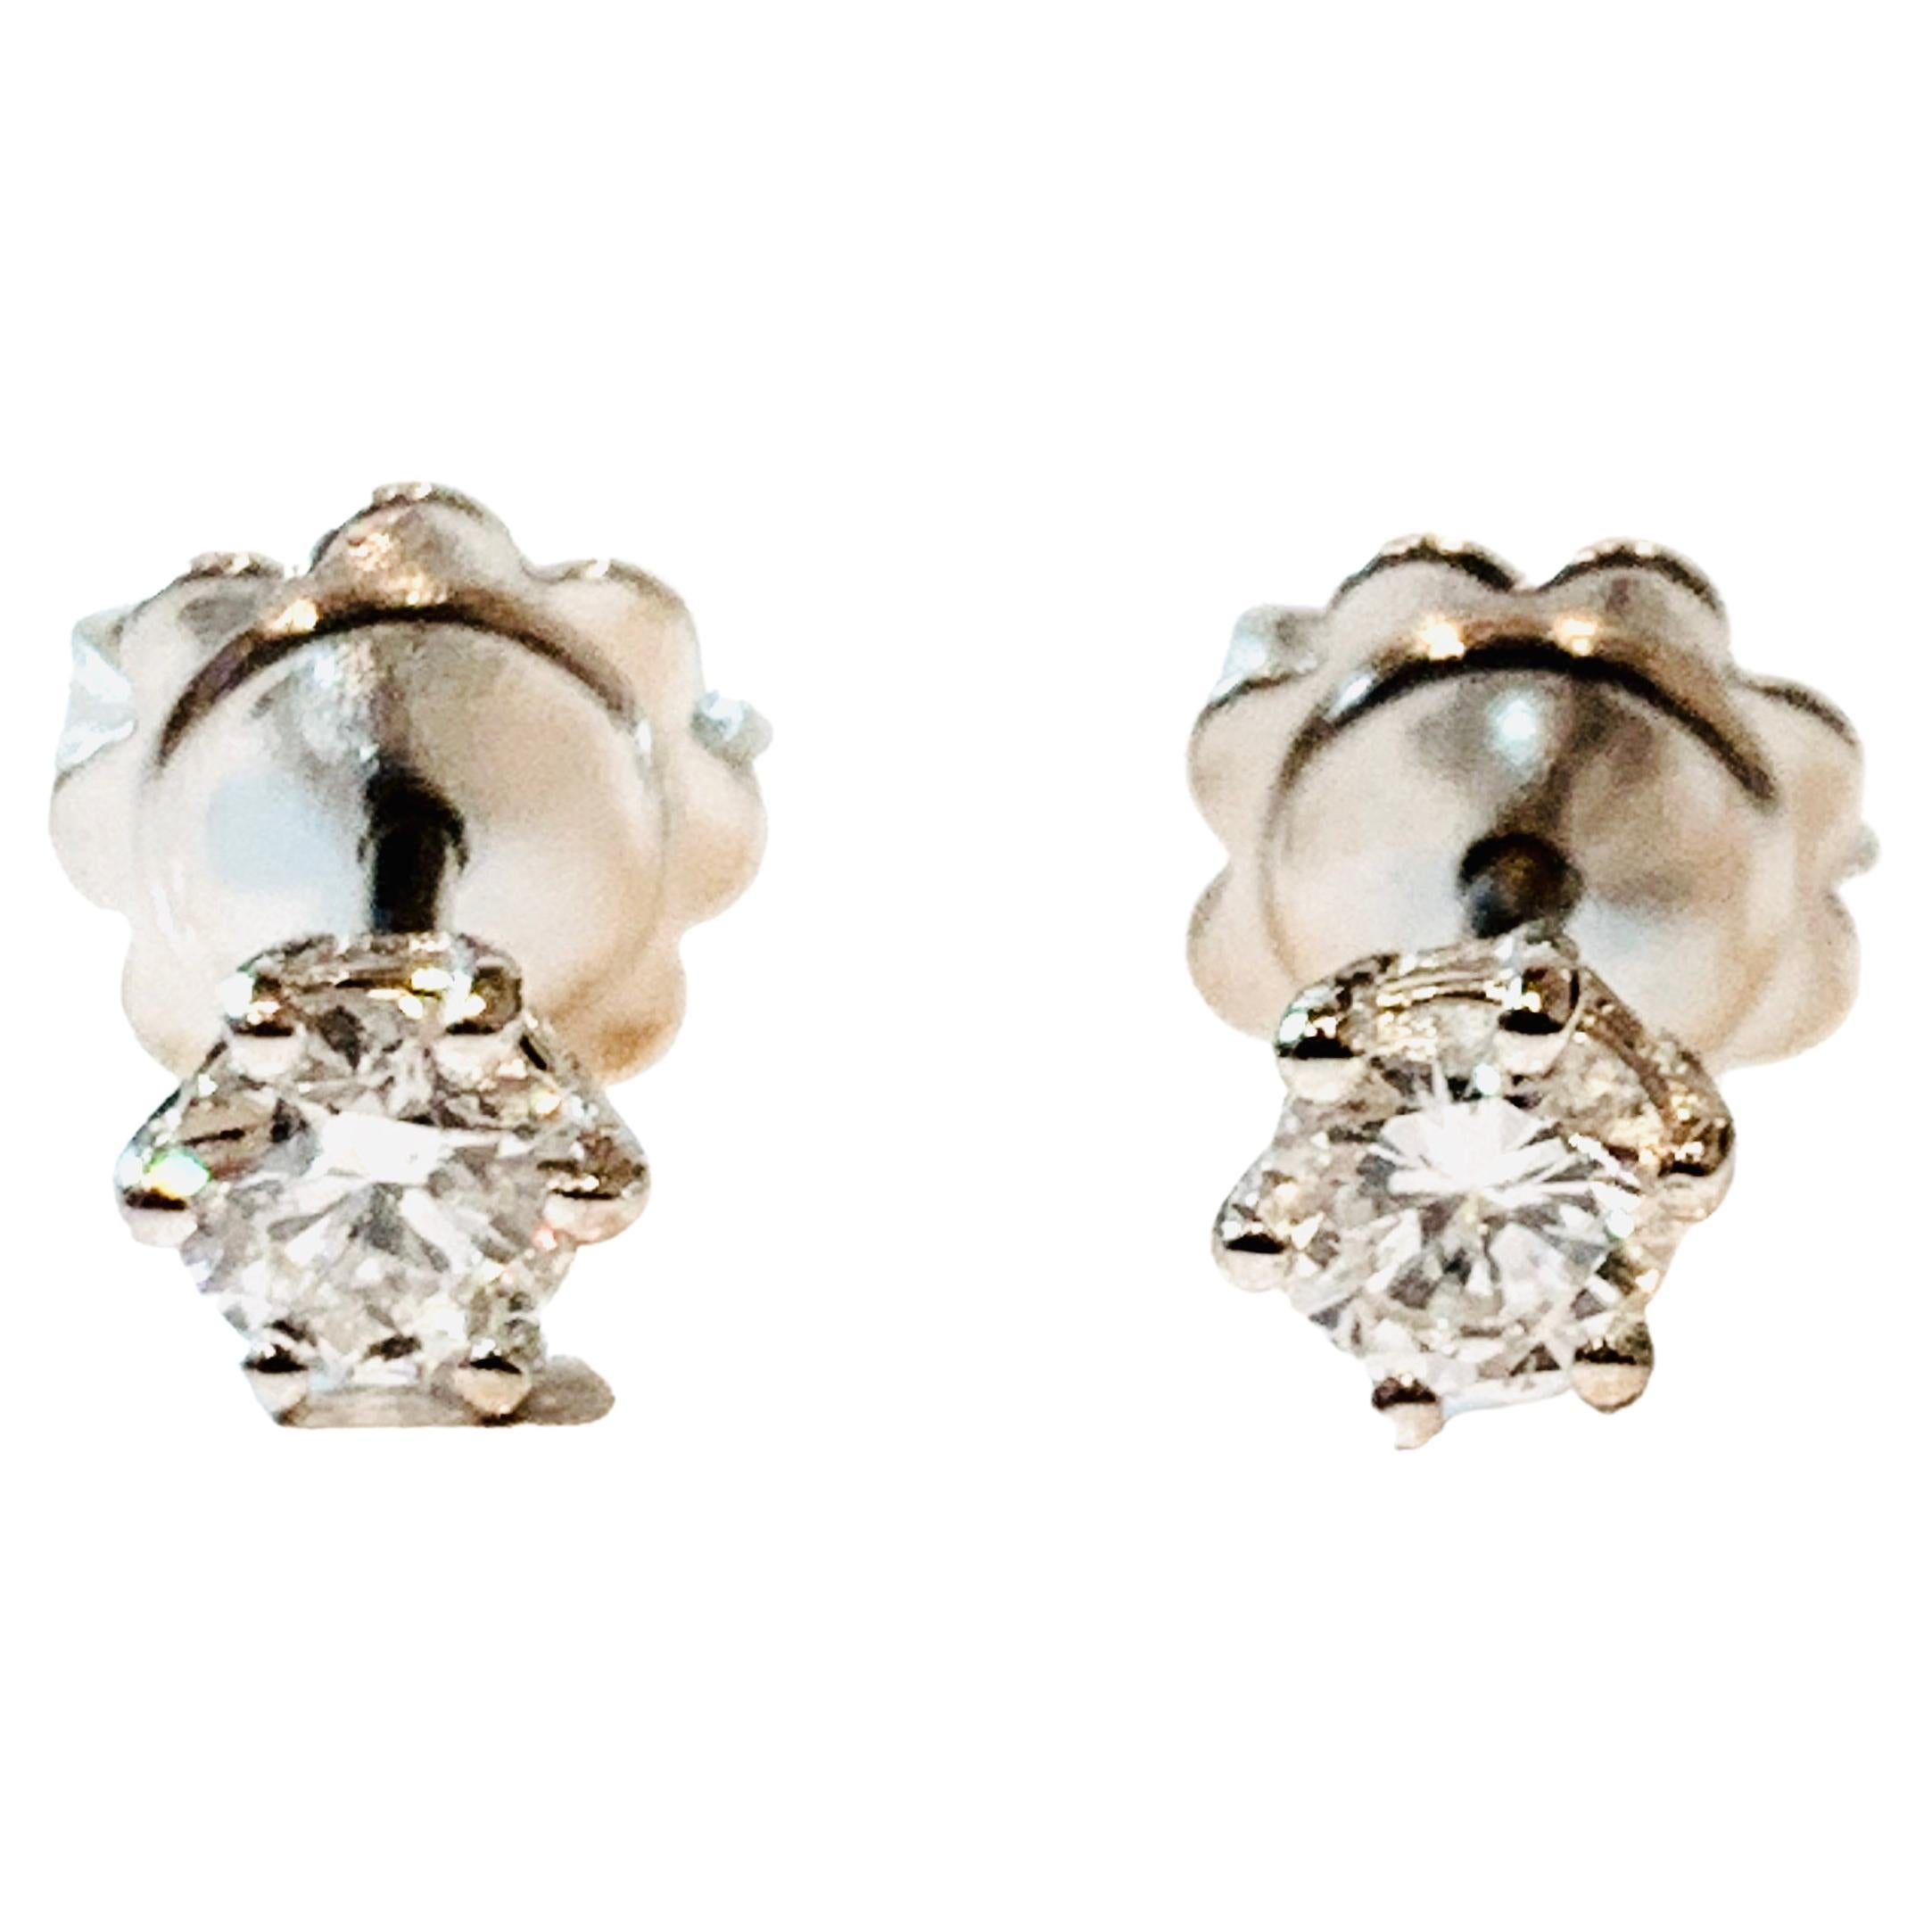 These certified 0.27 carat Diamond stud earrings are from the HRD Antwerp Star collection. 

Designed with the Diamond nestled within a 5 pointed 18Kt white Gold star and secured on the ear with butterfly back closures. 

High quality natural